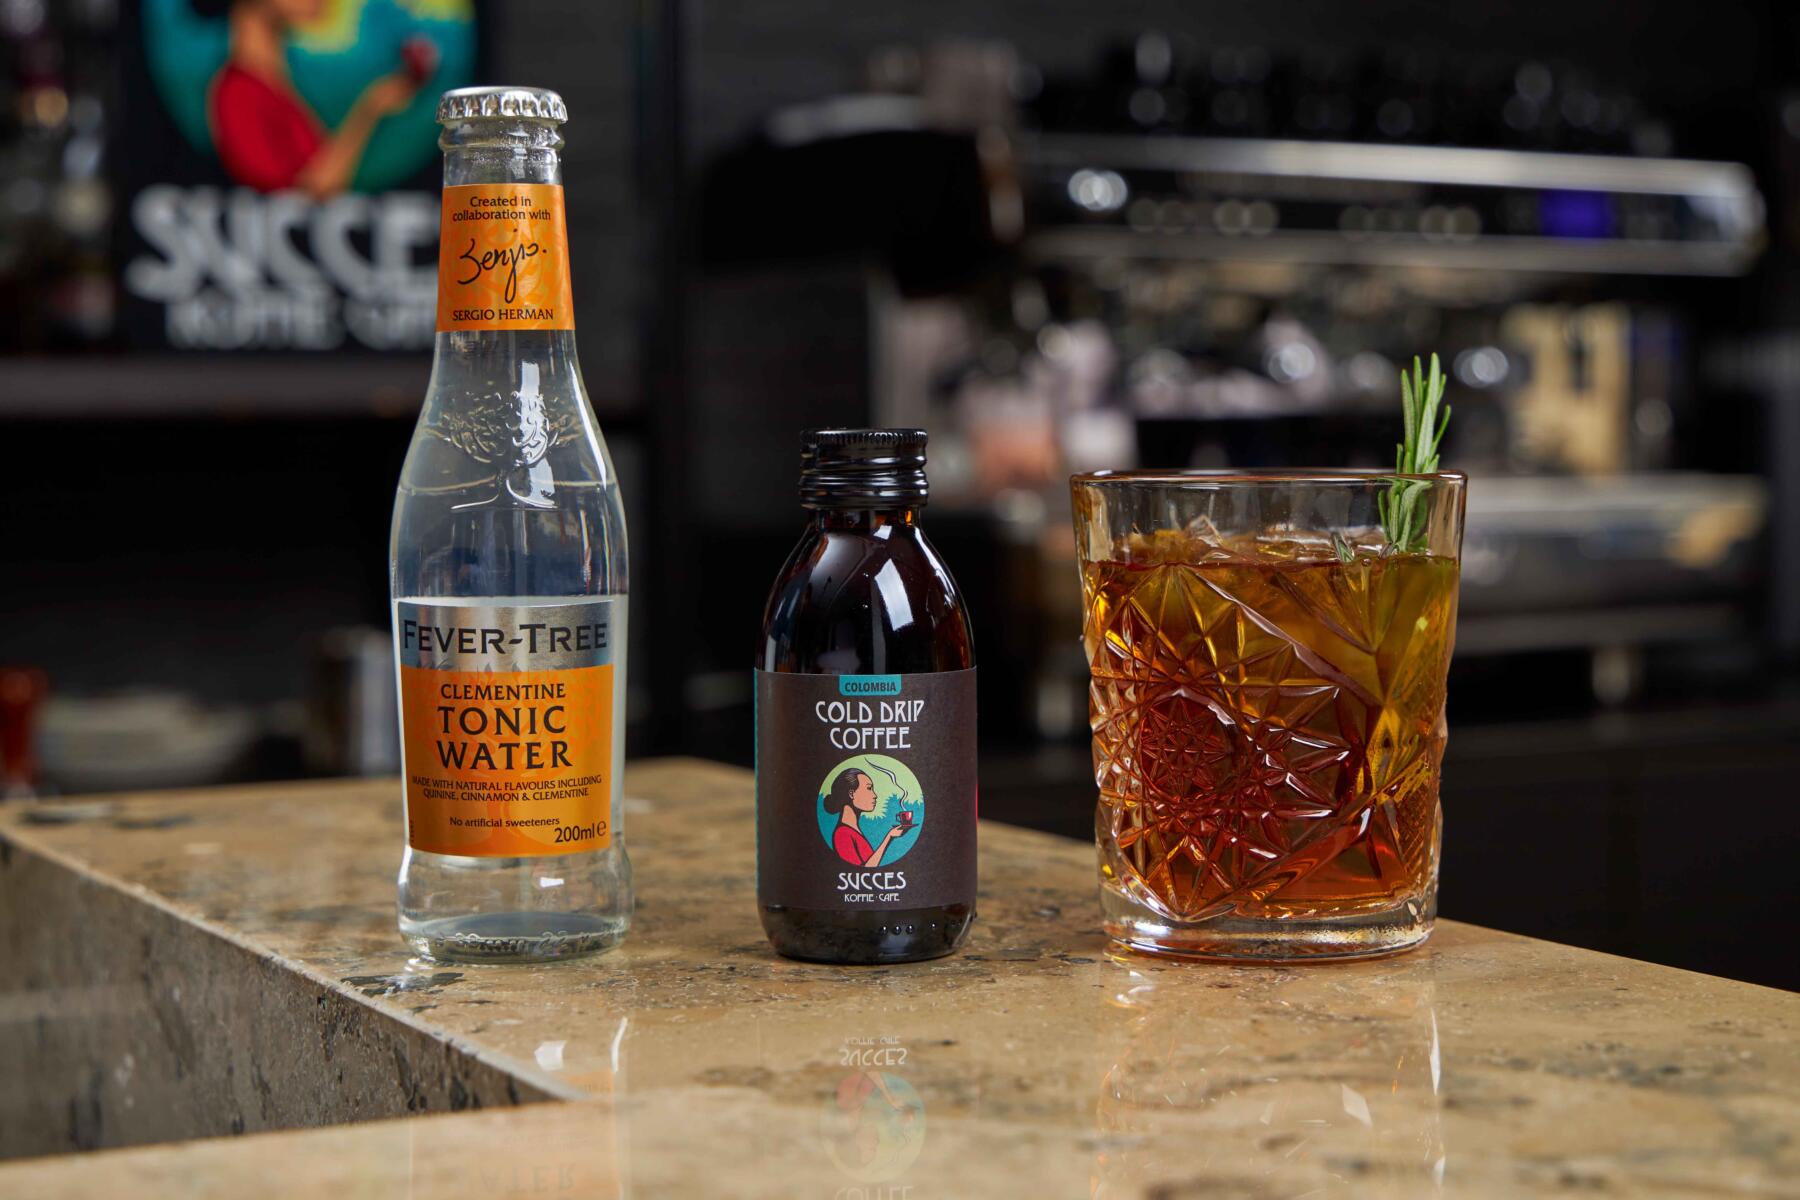 cold drip coffee fever tree tonic